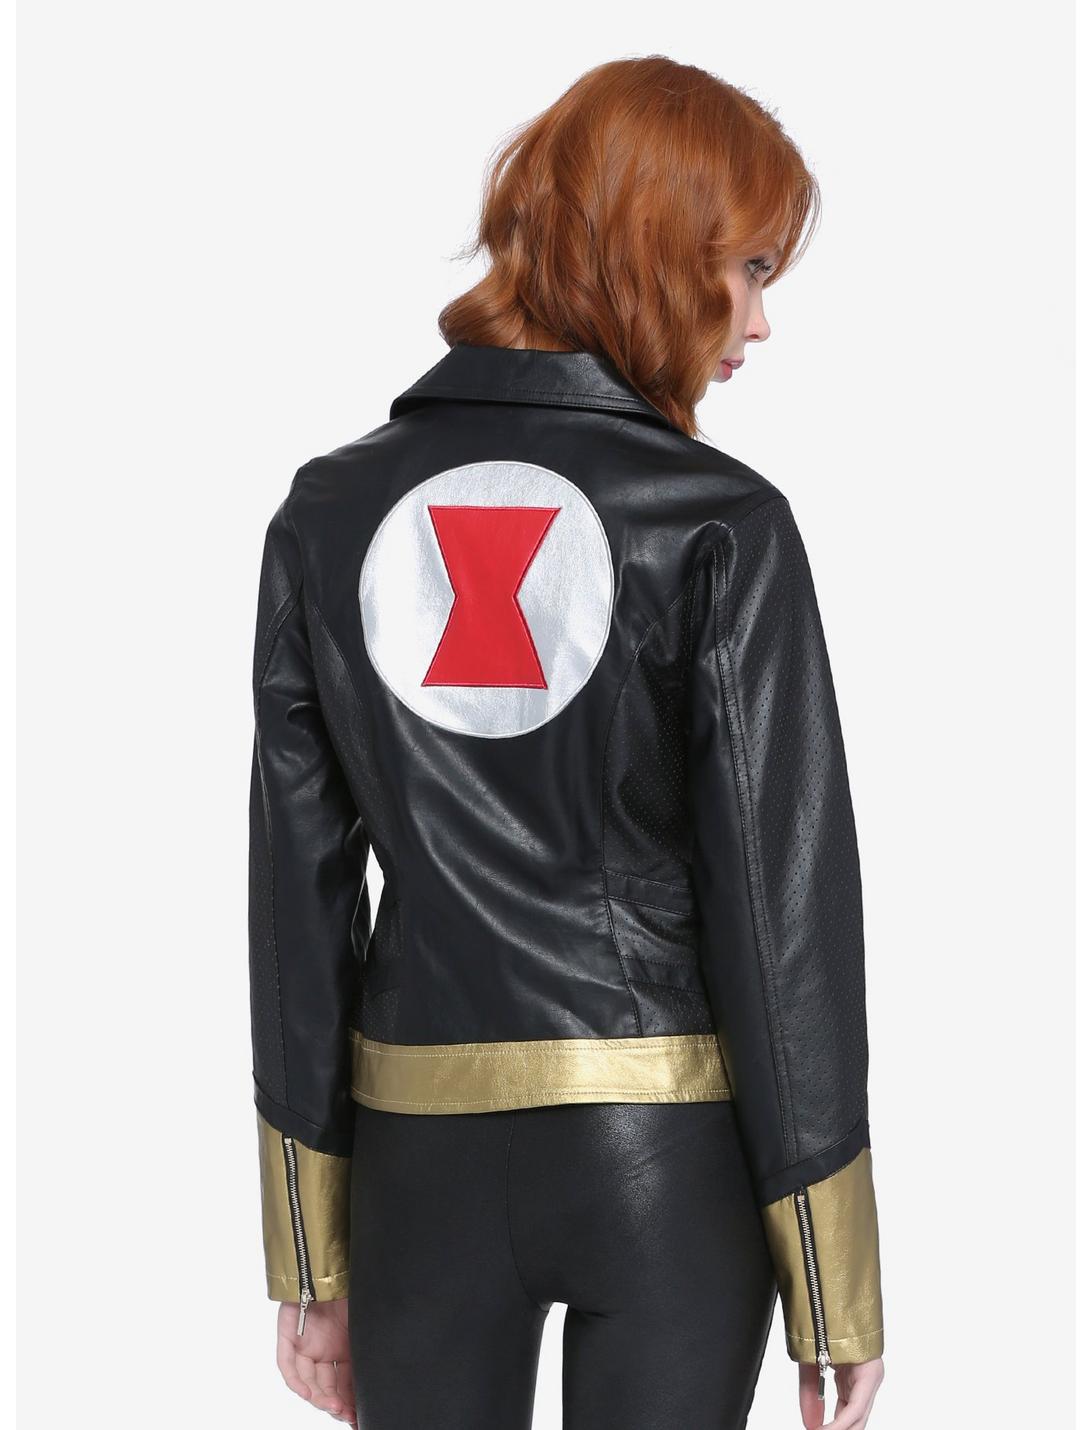 Her Universe Marvel Black Widow Faux Leather Girls Moto Jacket, RED, hi-res